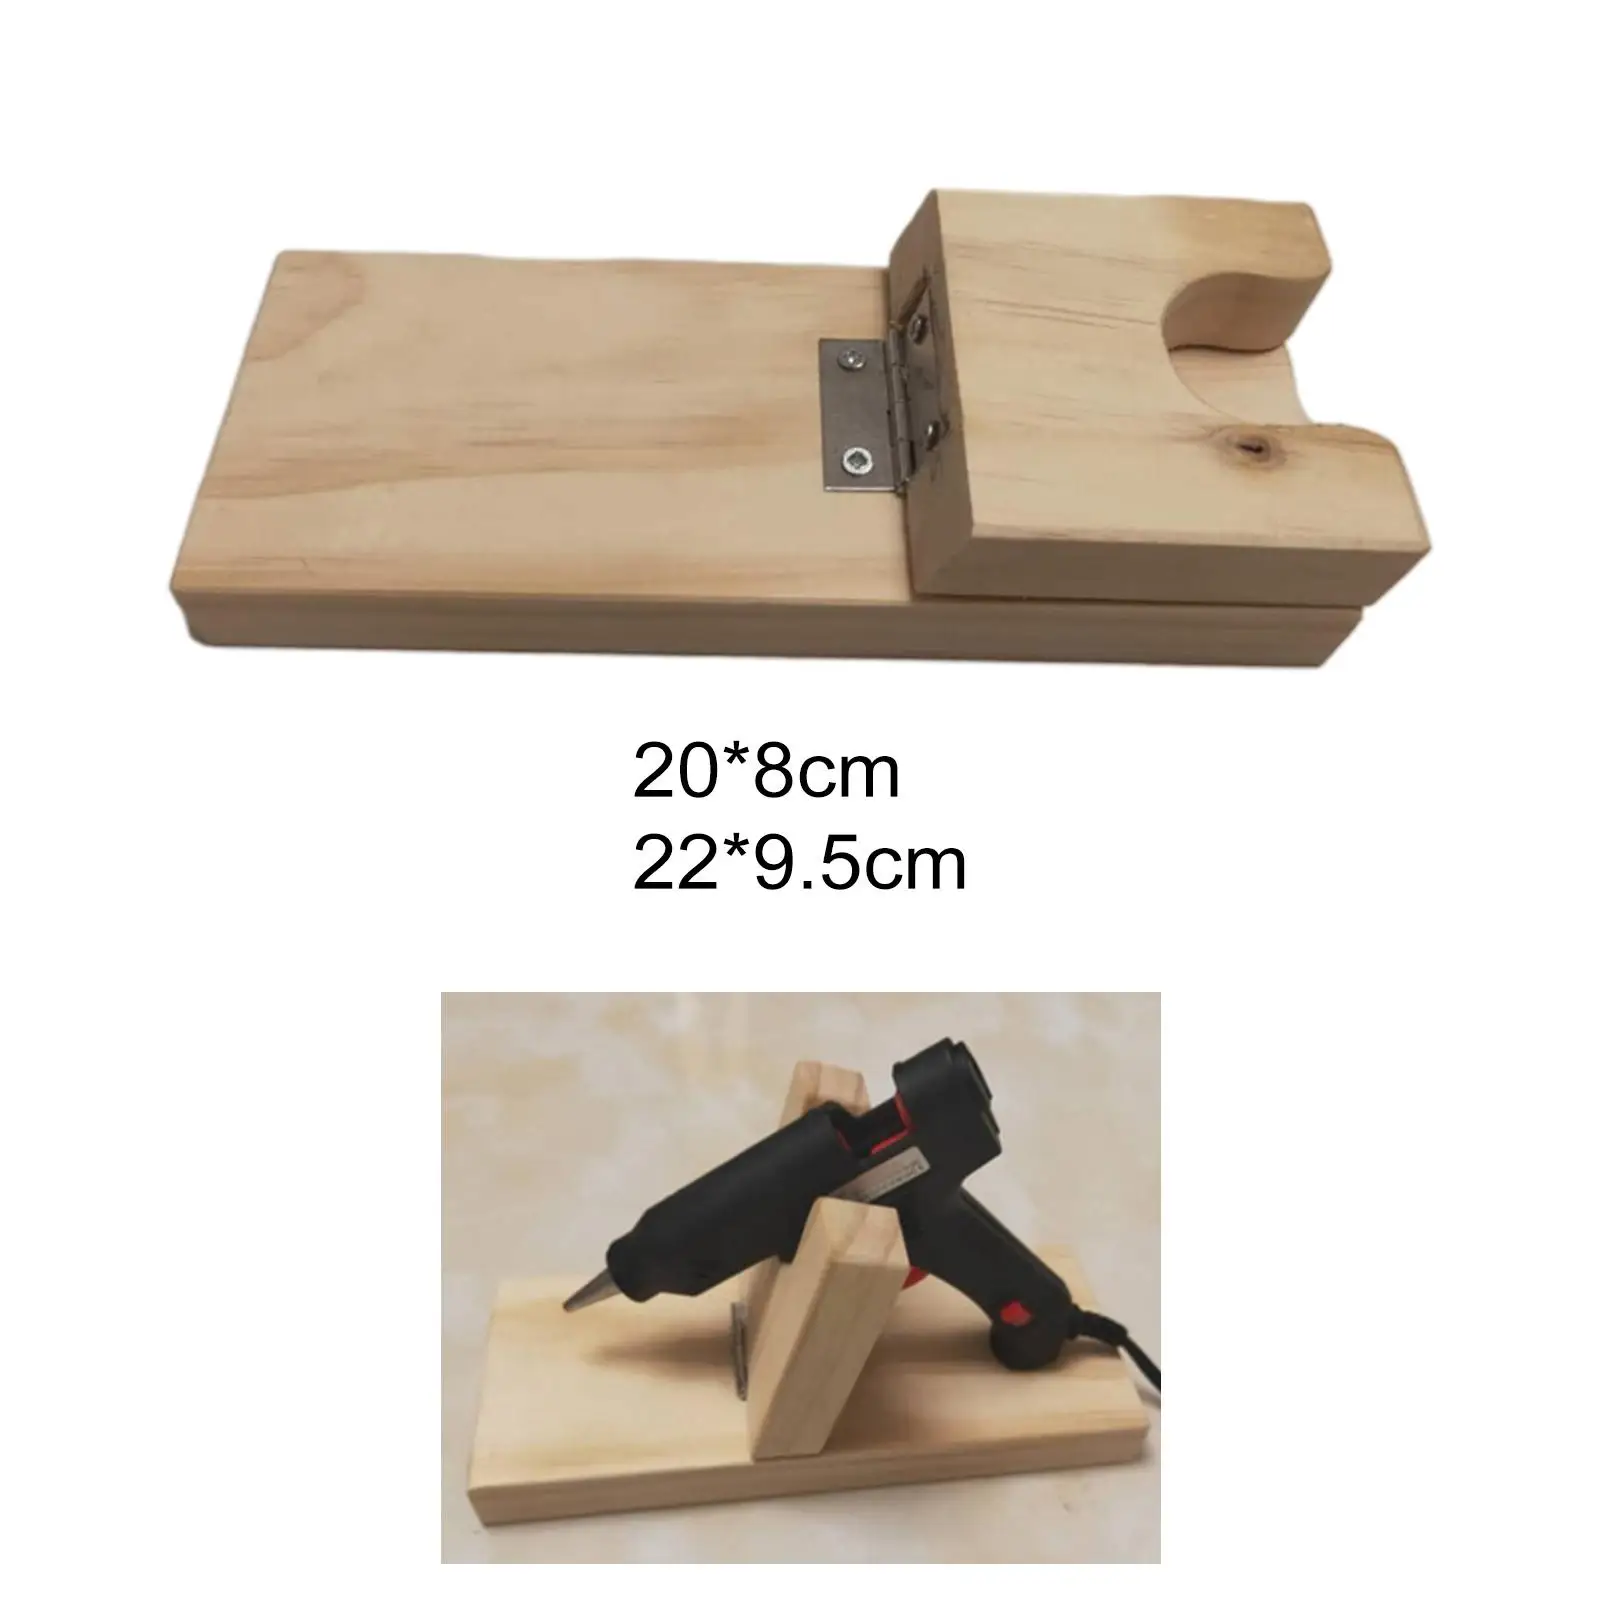 Hot Glue Stand Hot Glue Sprayer Rack Tabletop Hot Glue Machine Stand Portable Foldable Hot Glue Holder Base for Home Accessories